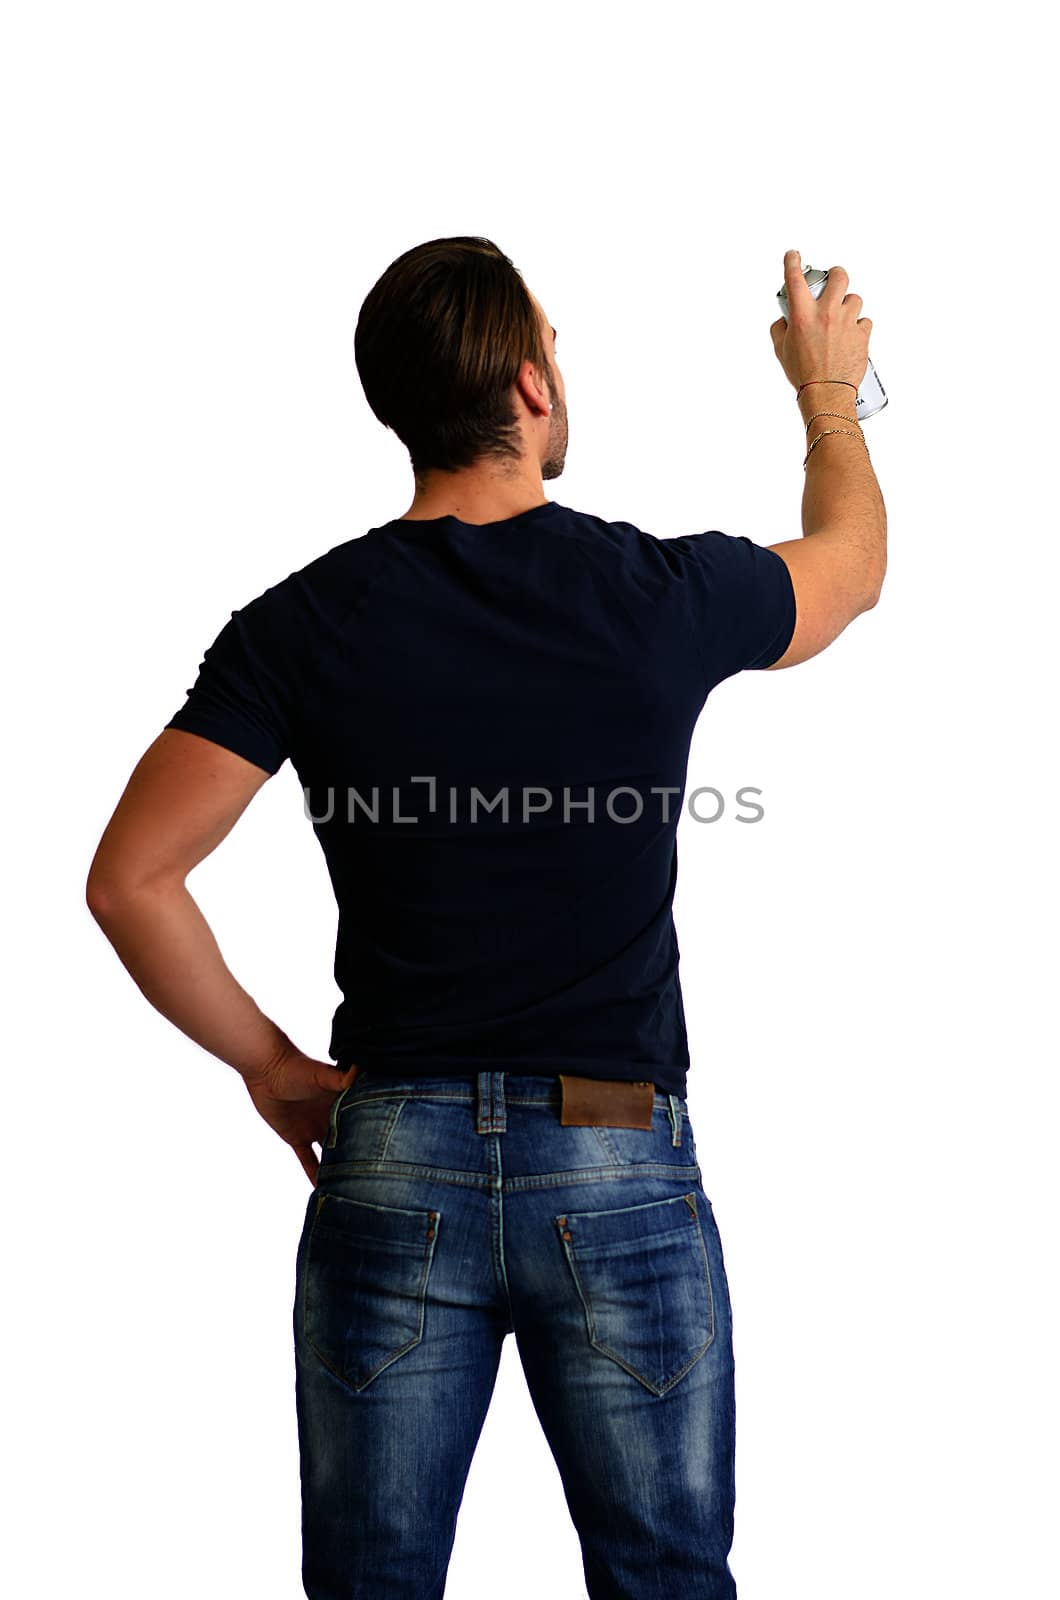 Back of young man with spray paint drawing or writing on empty, blank space seen from behind